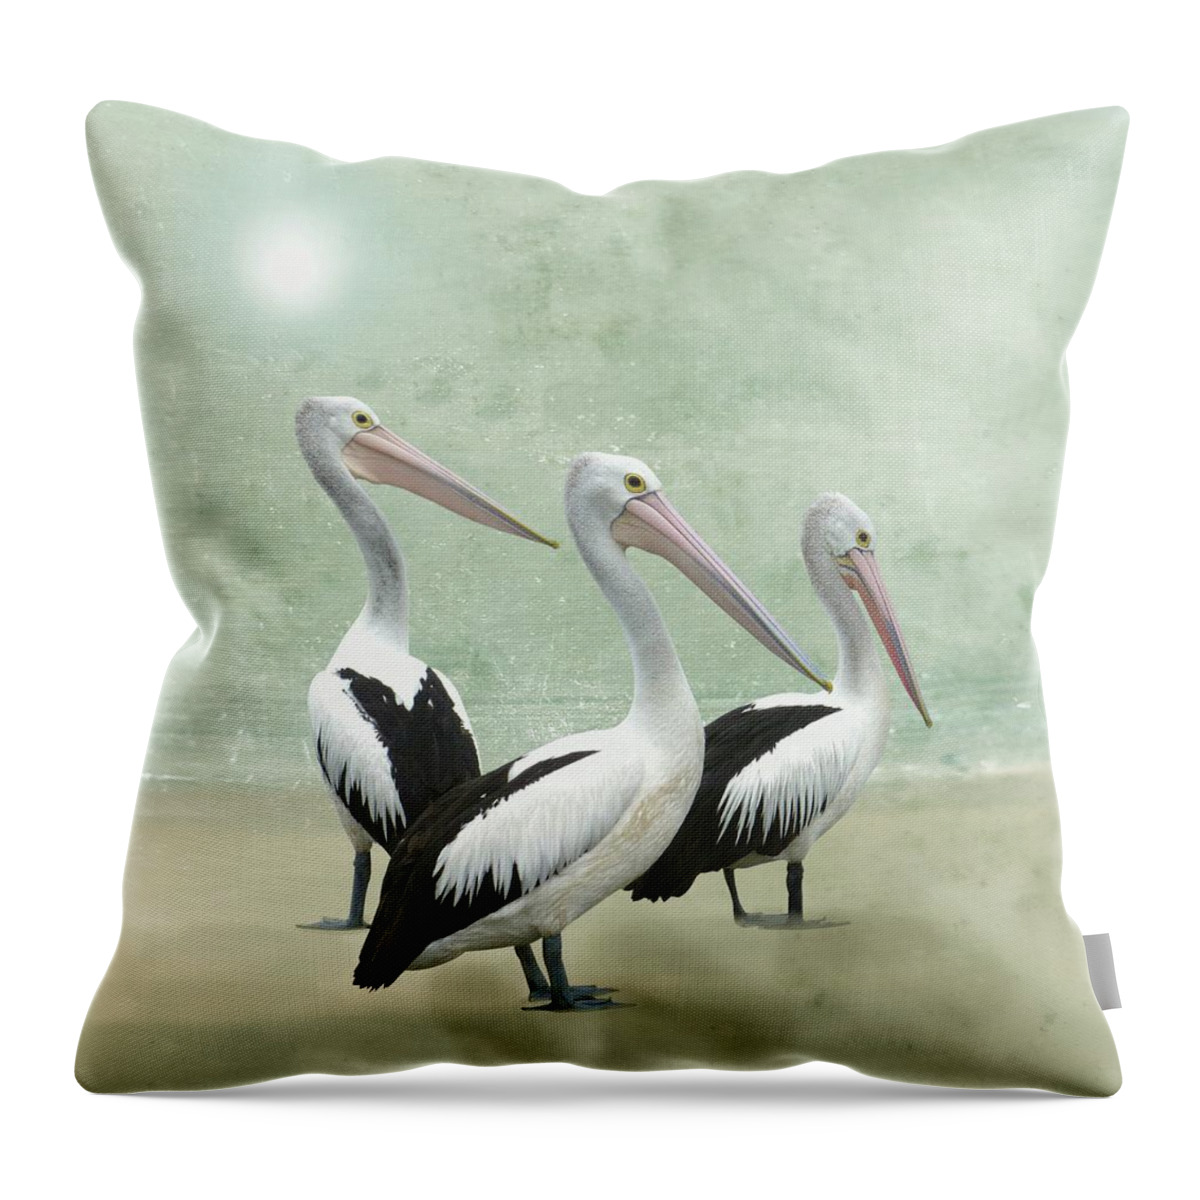 Pelican Throw Pillow featuring the painting Pelican Beach by David Dehner